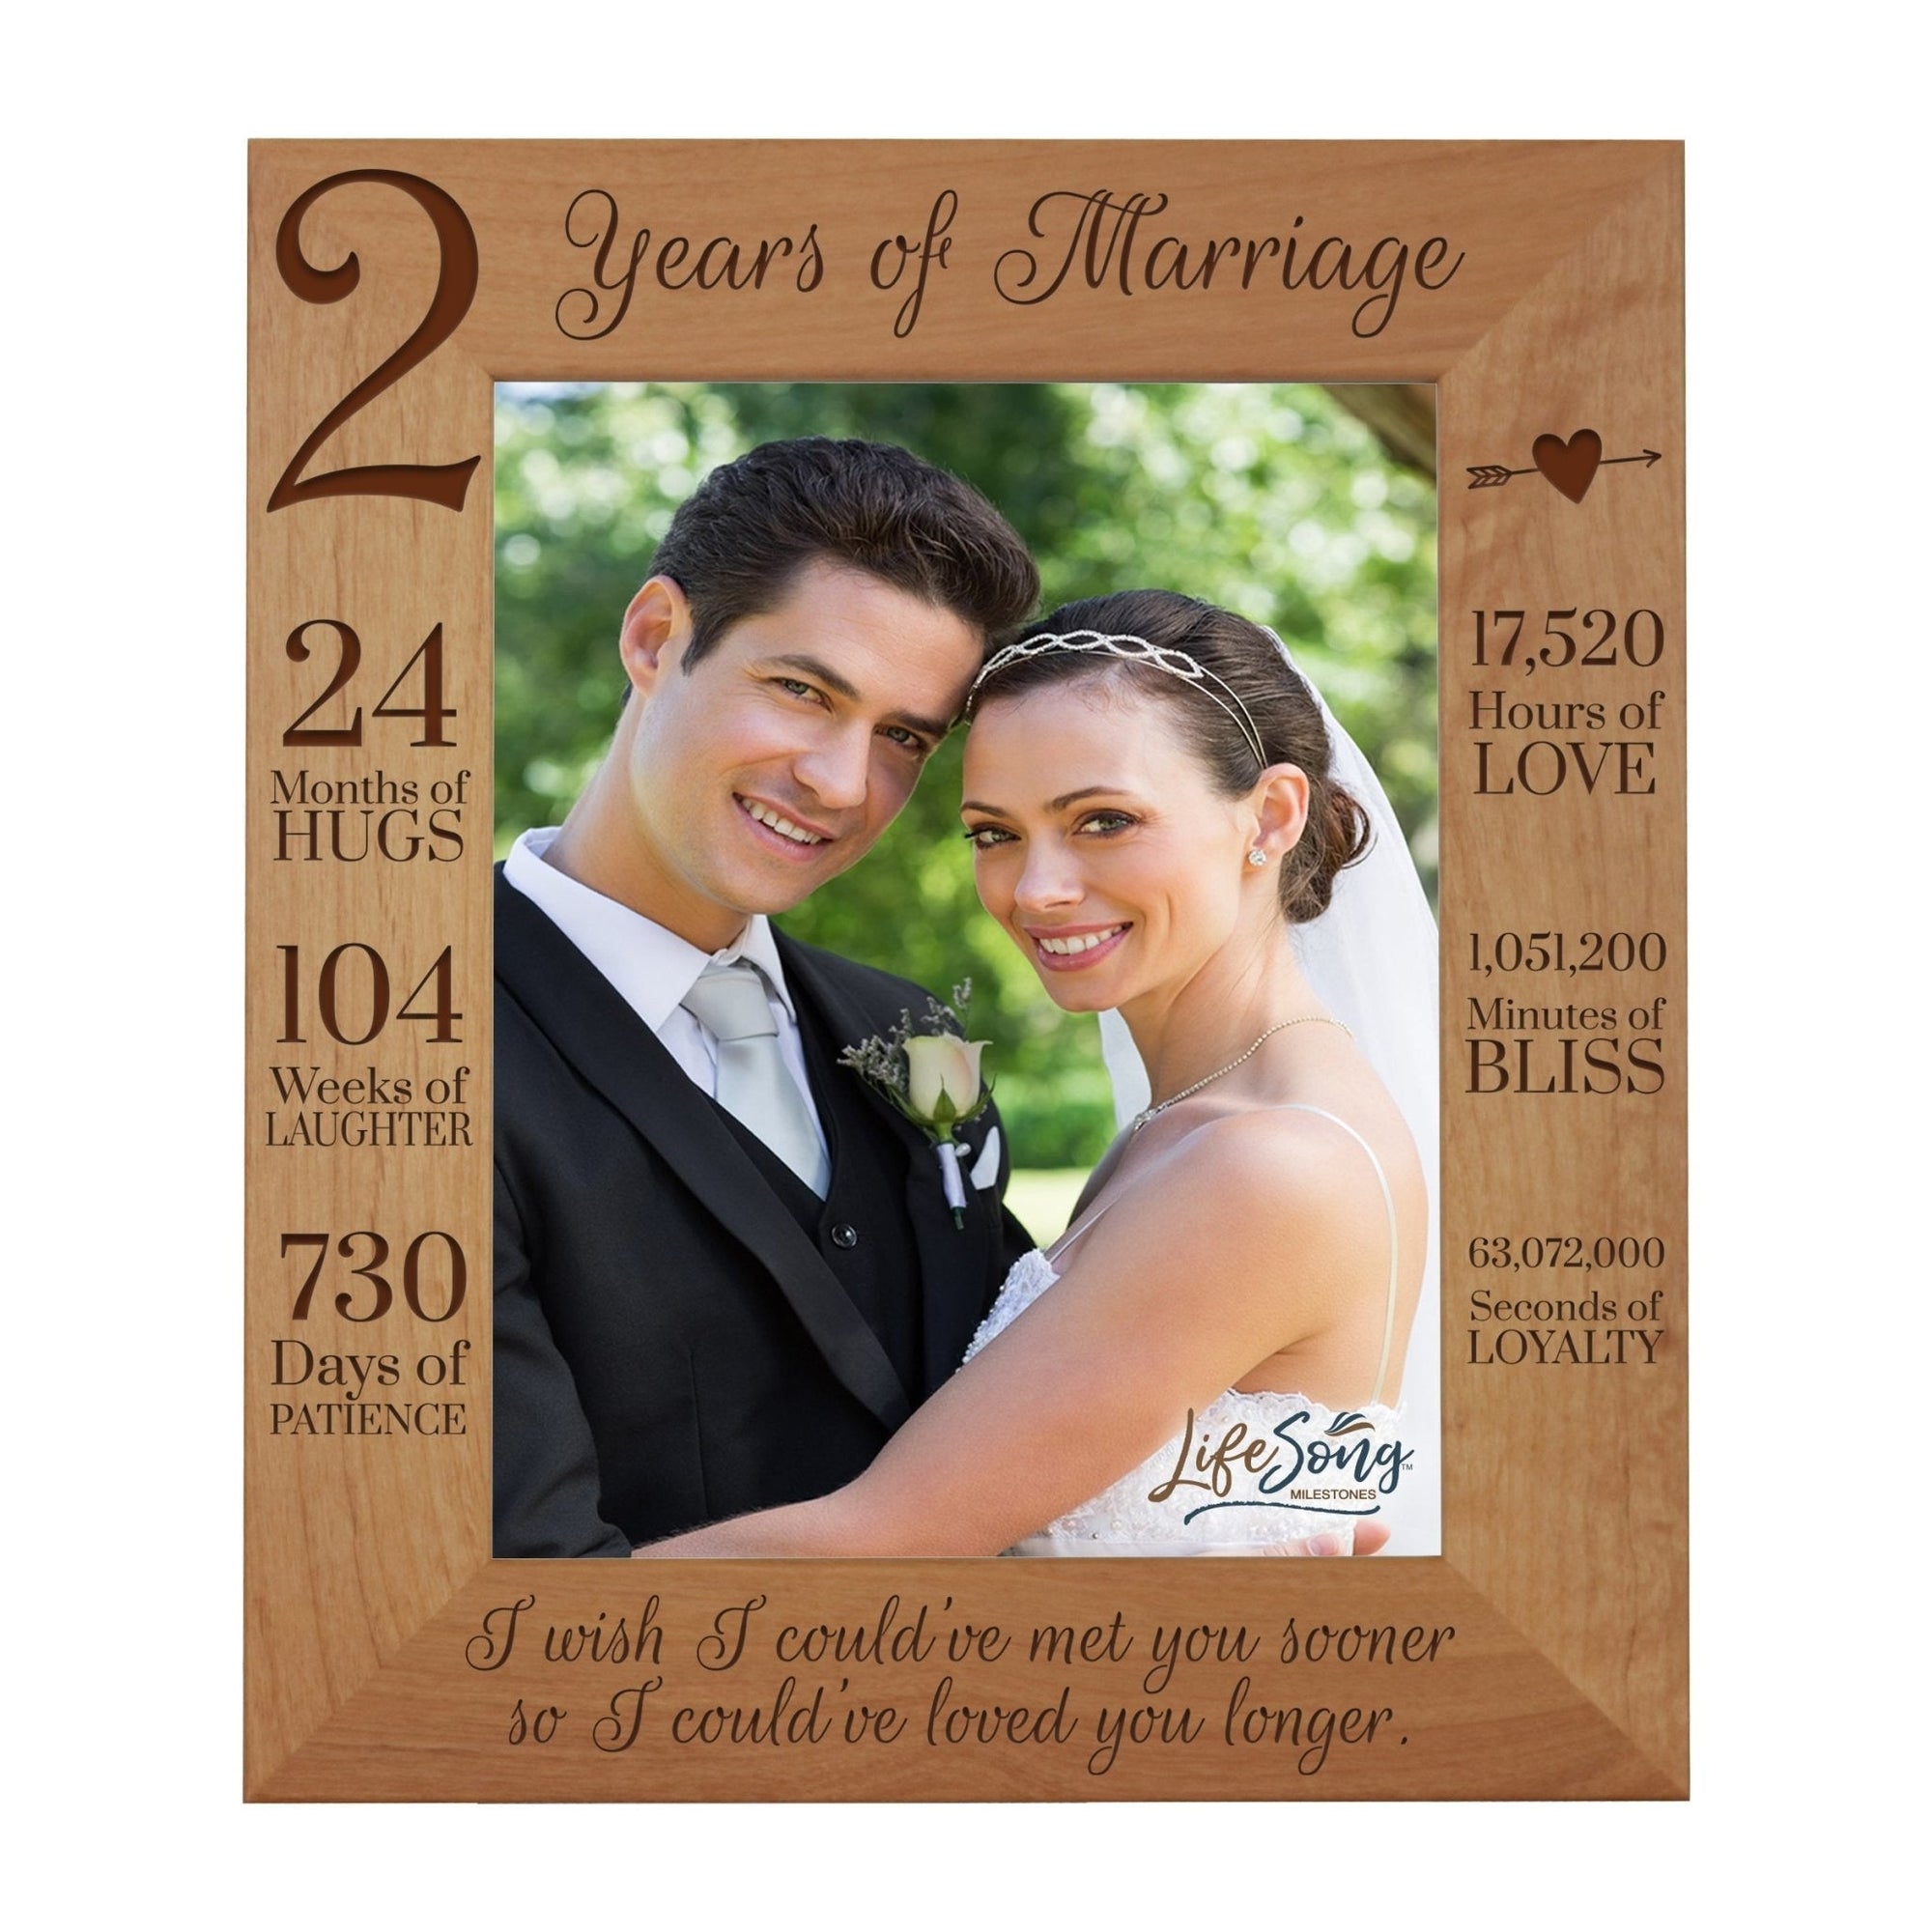 Couples 2nd Wedding Anniversary Photo Frame Home Decor Gift Ideas - Met You Sooner - LifeSong Milestones